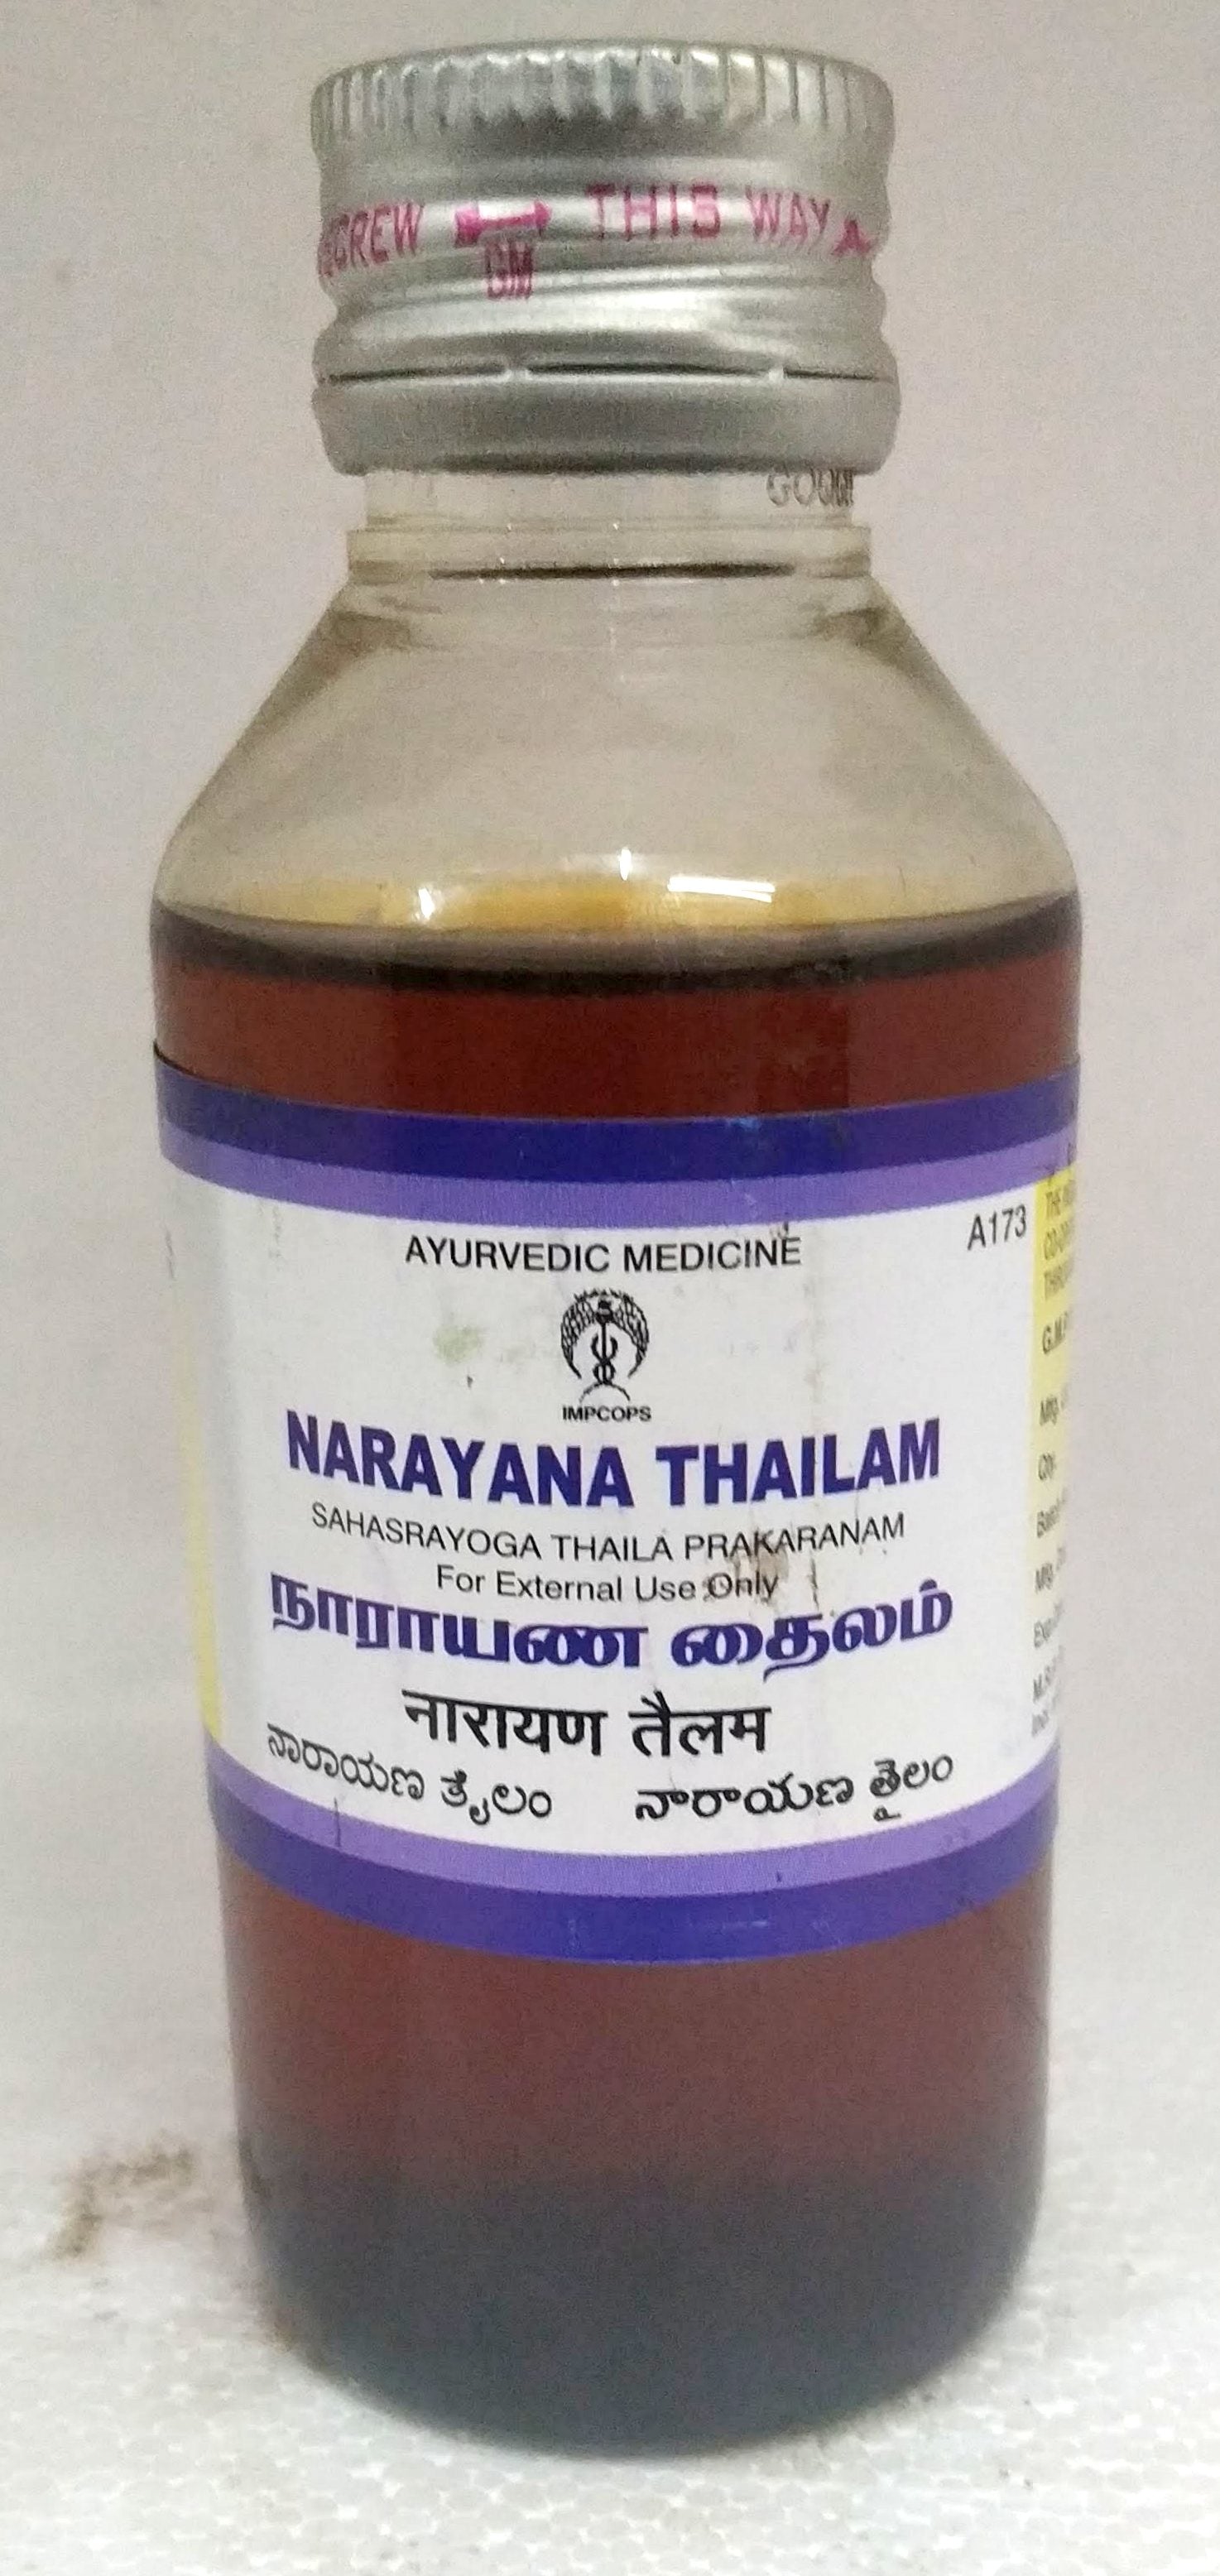 Shop Impcops Narayana Thailam 100ml at price 297.00 from Impcops Online - Ayush Care